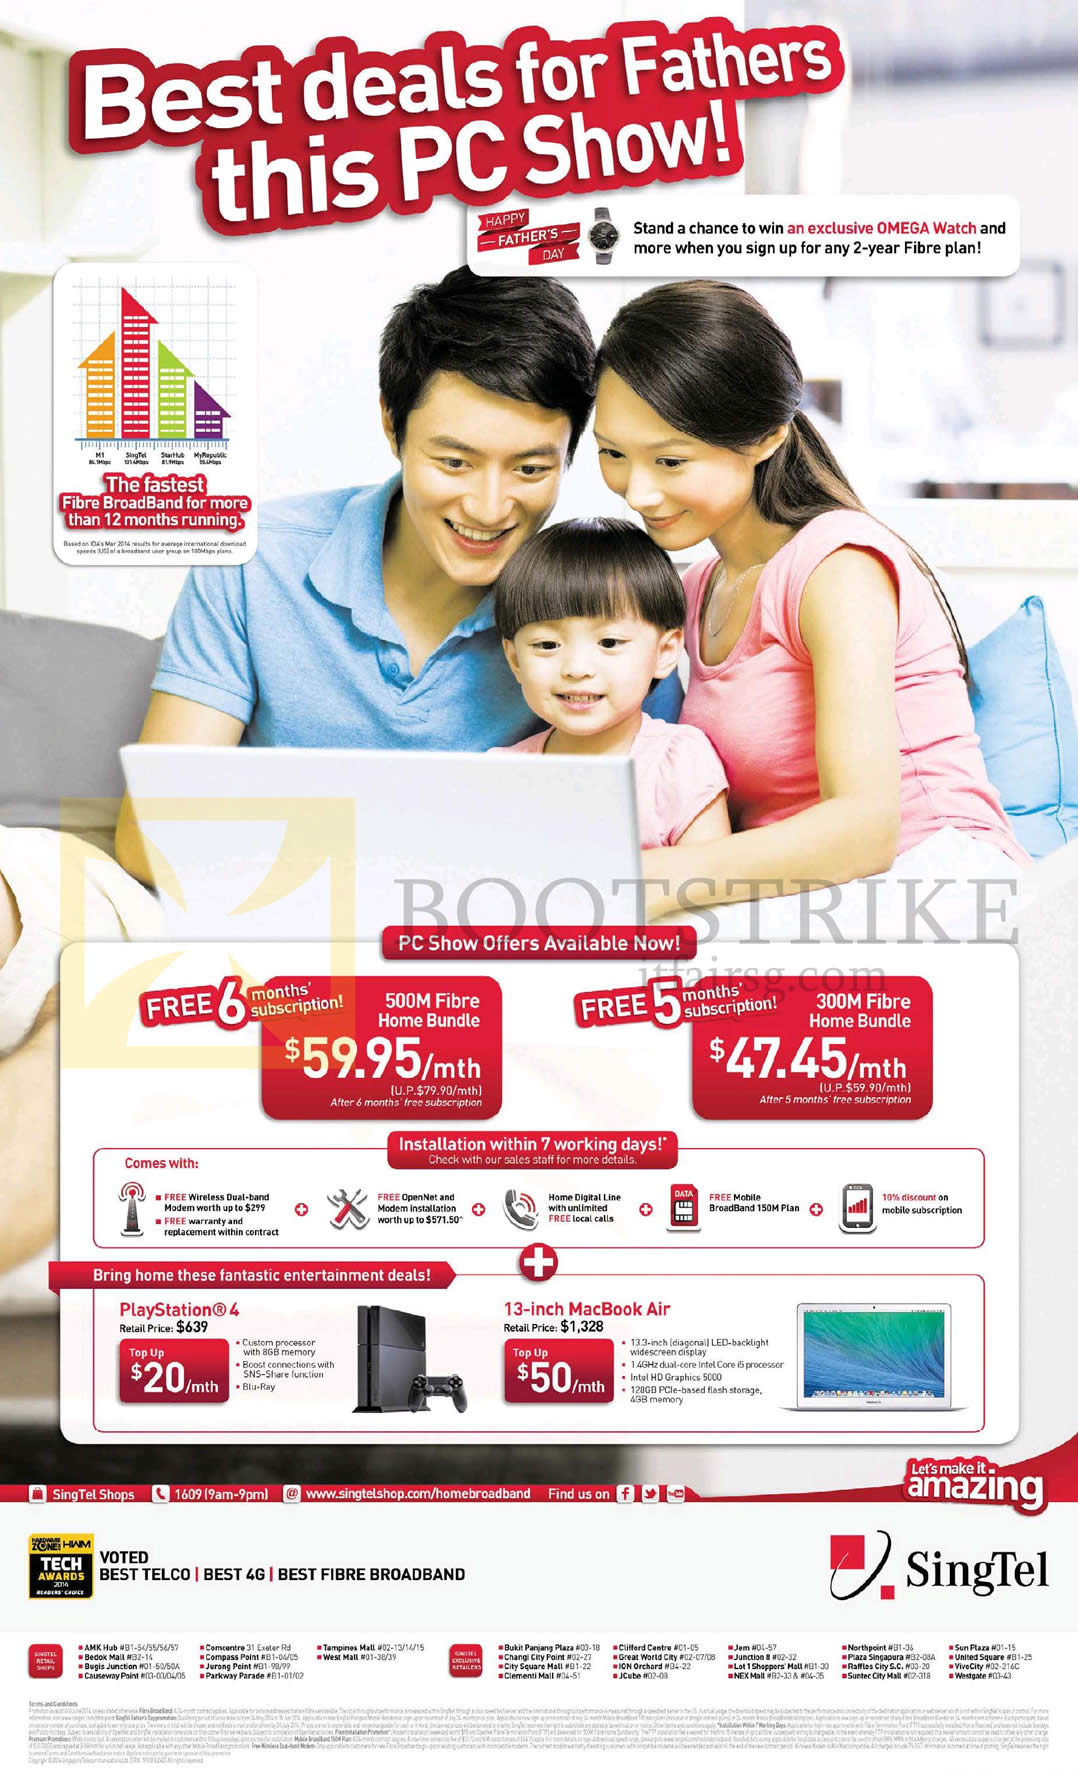 PC SHOW 2014 price list image brochure of Singtel Fibre Broadband 500Mbps, 300Mbps, Free Up To 6 Months, Sony PlayStation 4 PS4, Apple Macbook Air